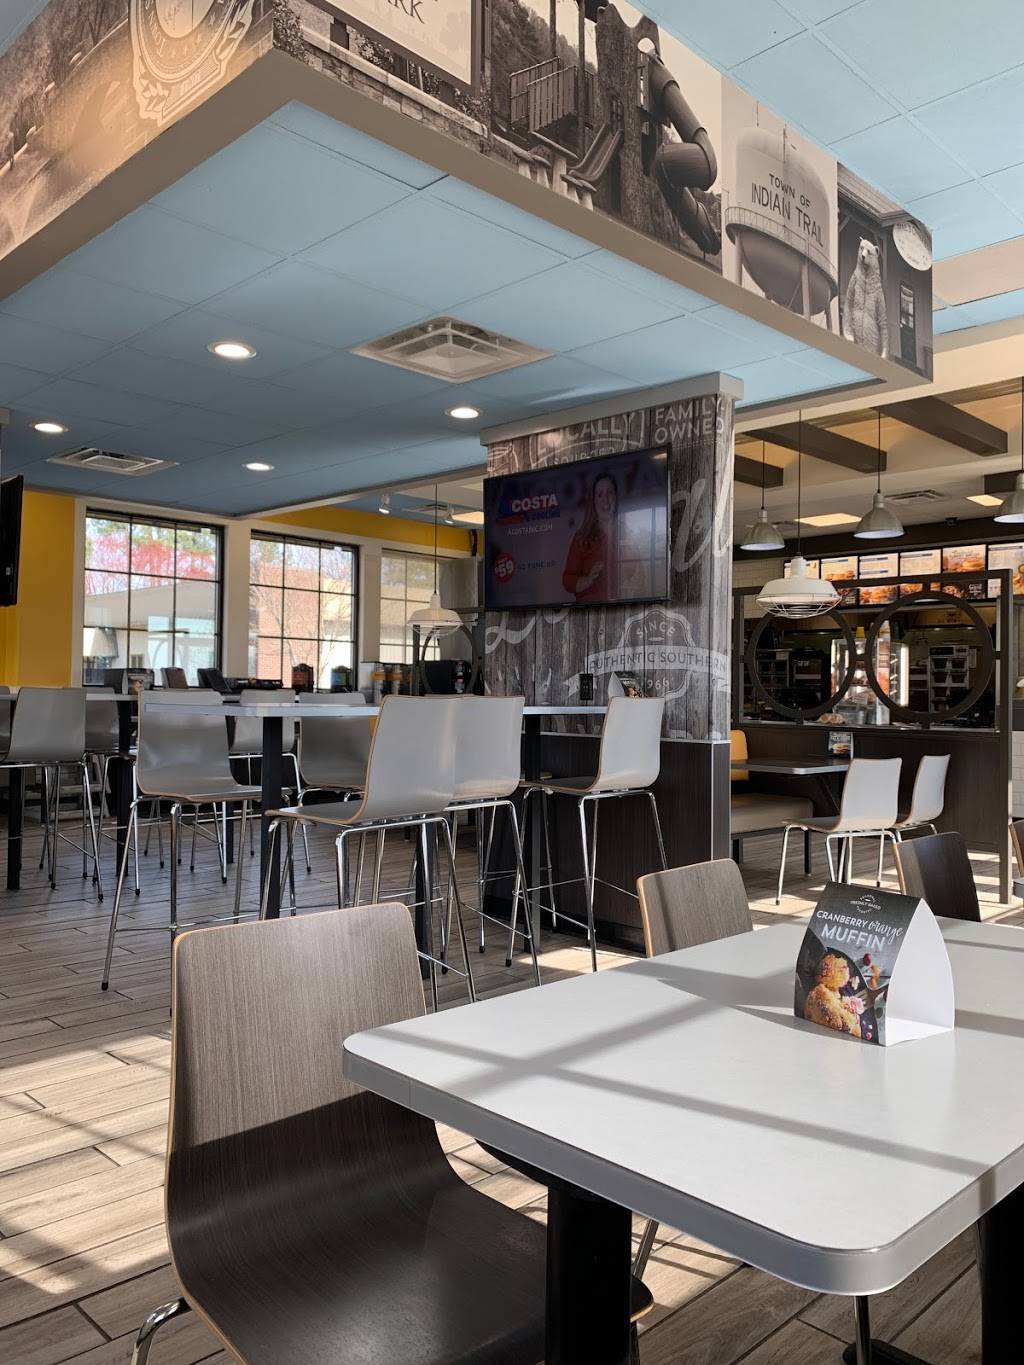 Biscuitville | E Independence Blvd, Indian Trail, NC 28079 | Phone: (704) 628-6084